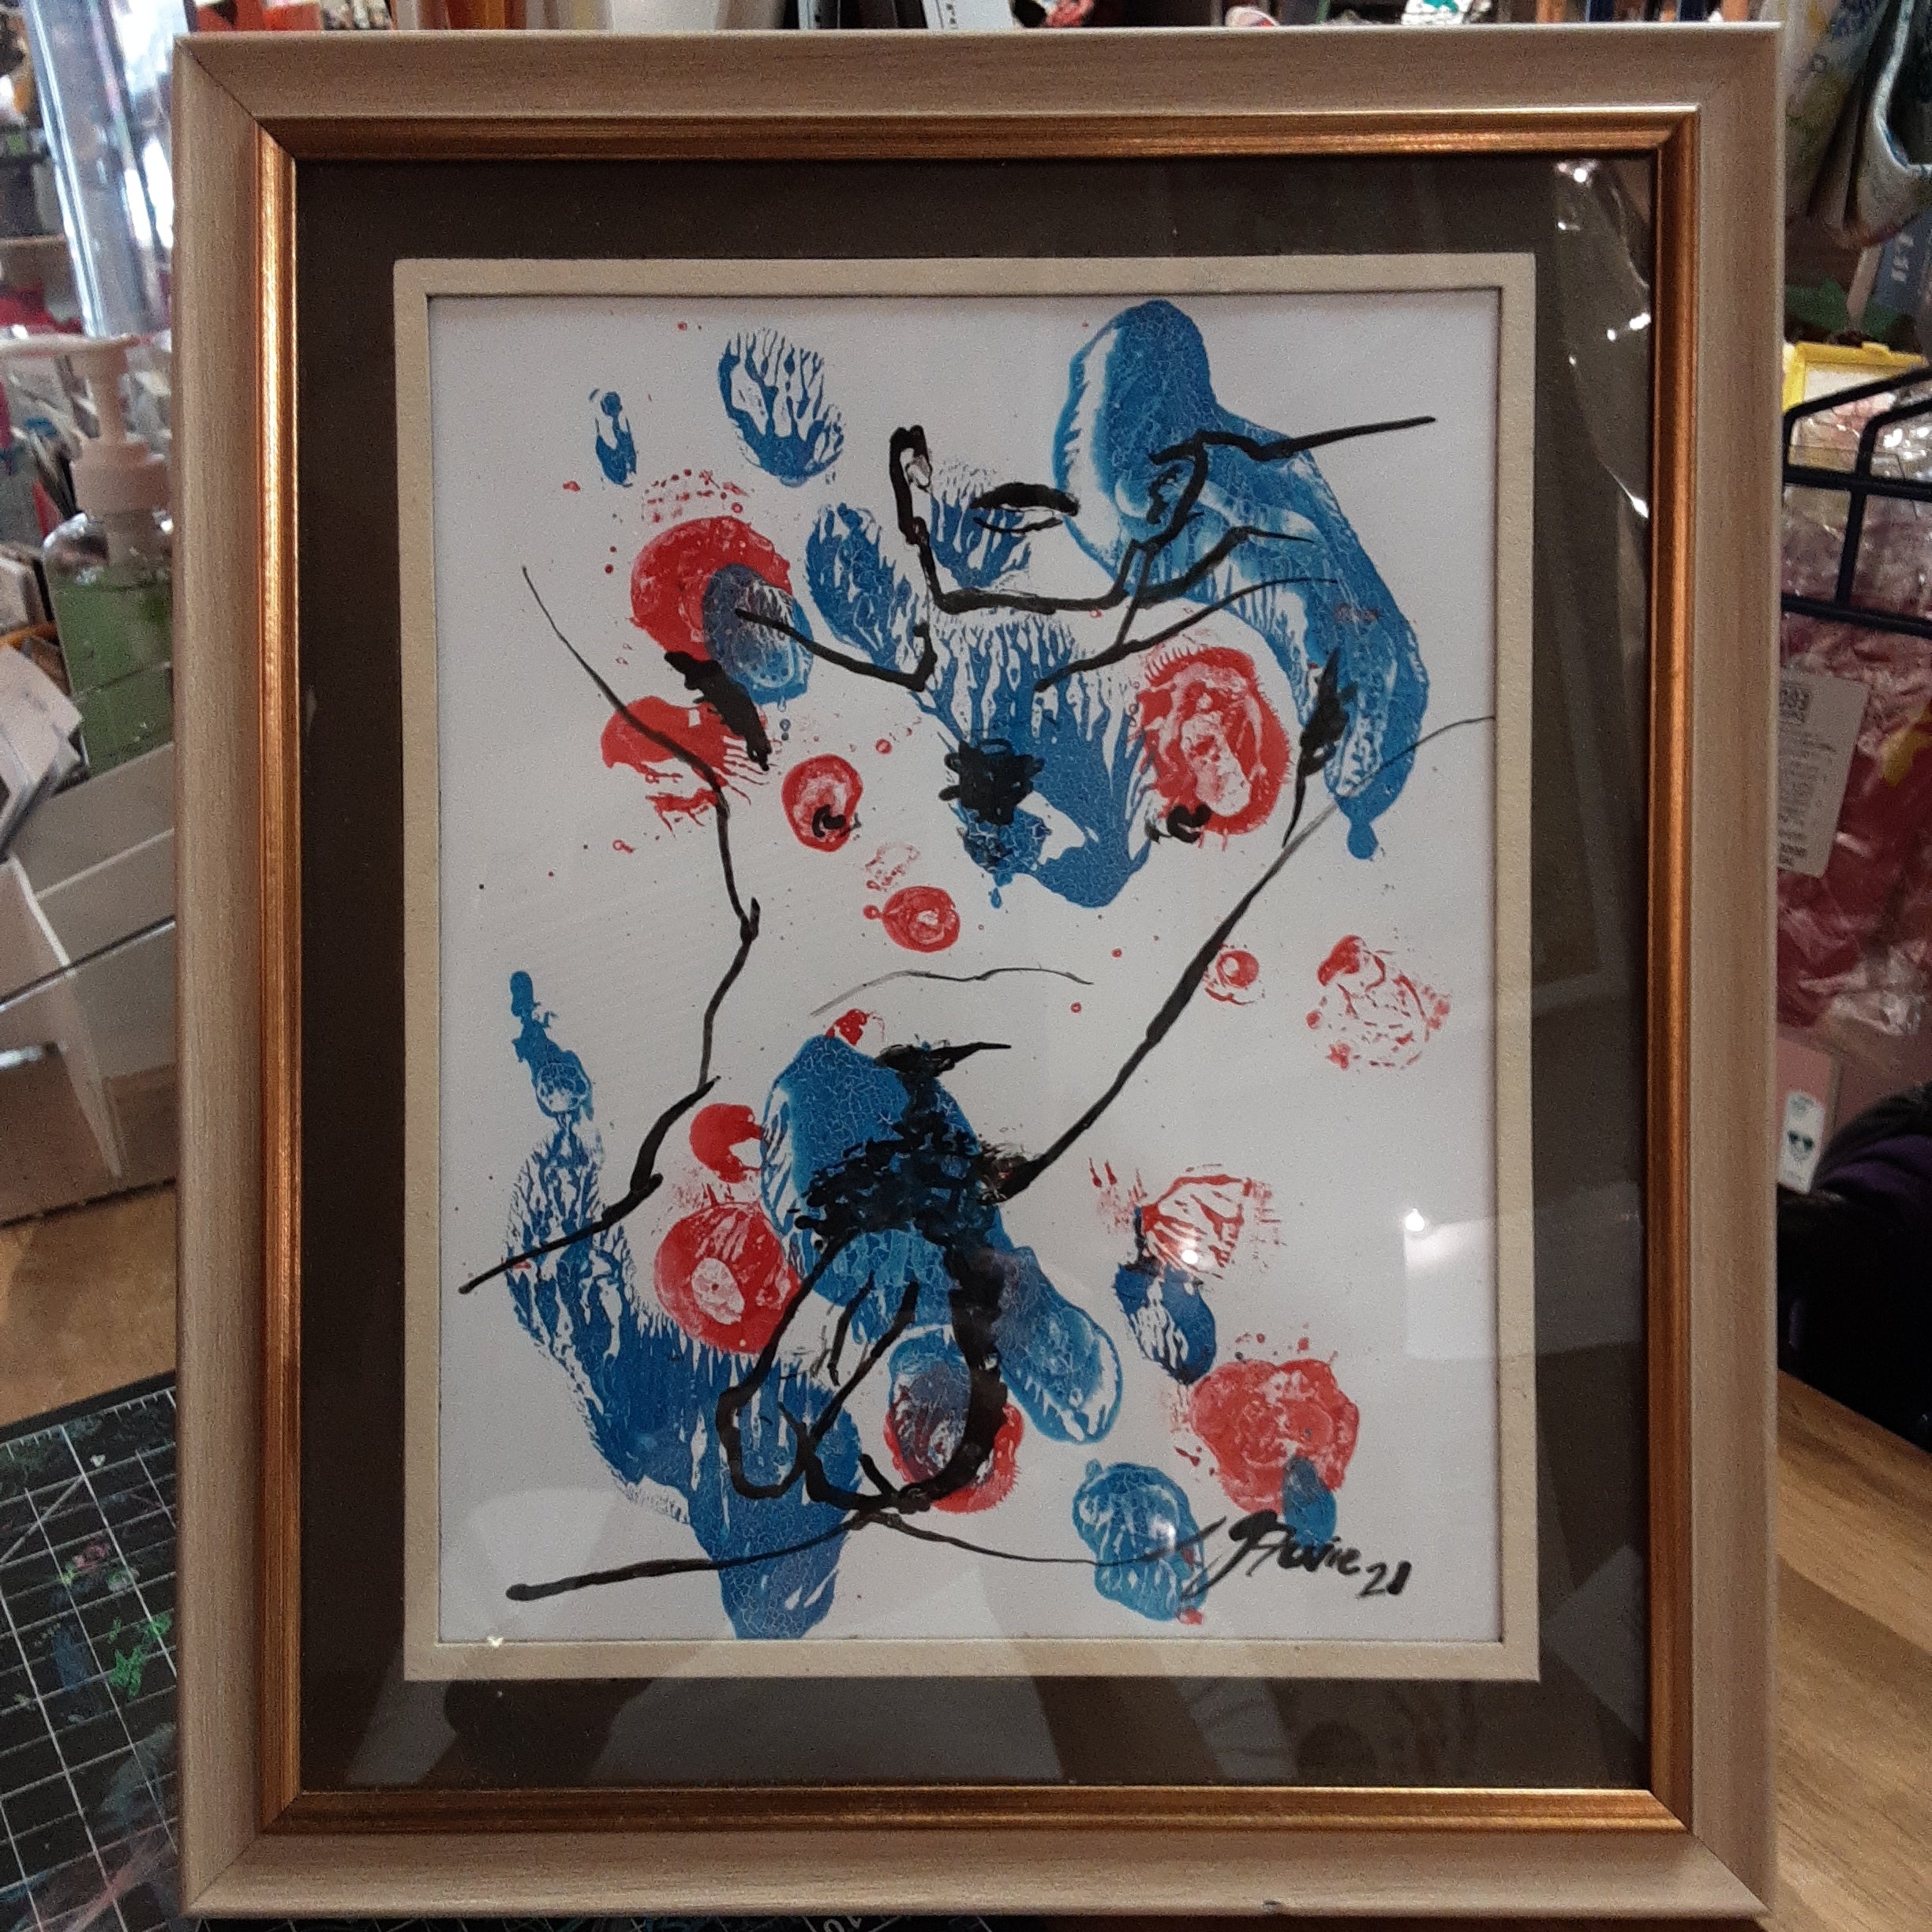 (Adult) Lounge In Blue and Red Framed Original Art by Stevie Laney